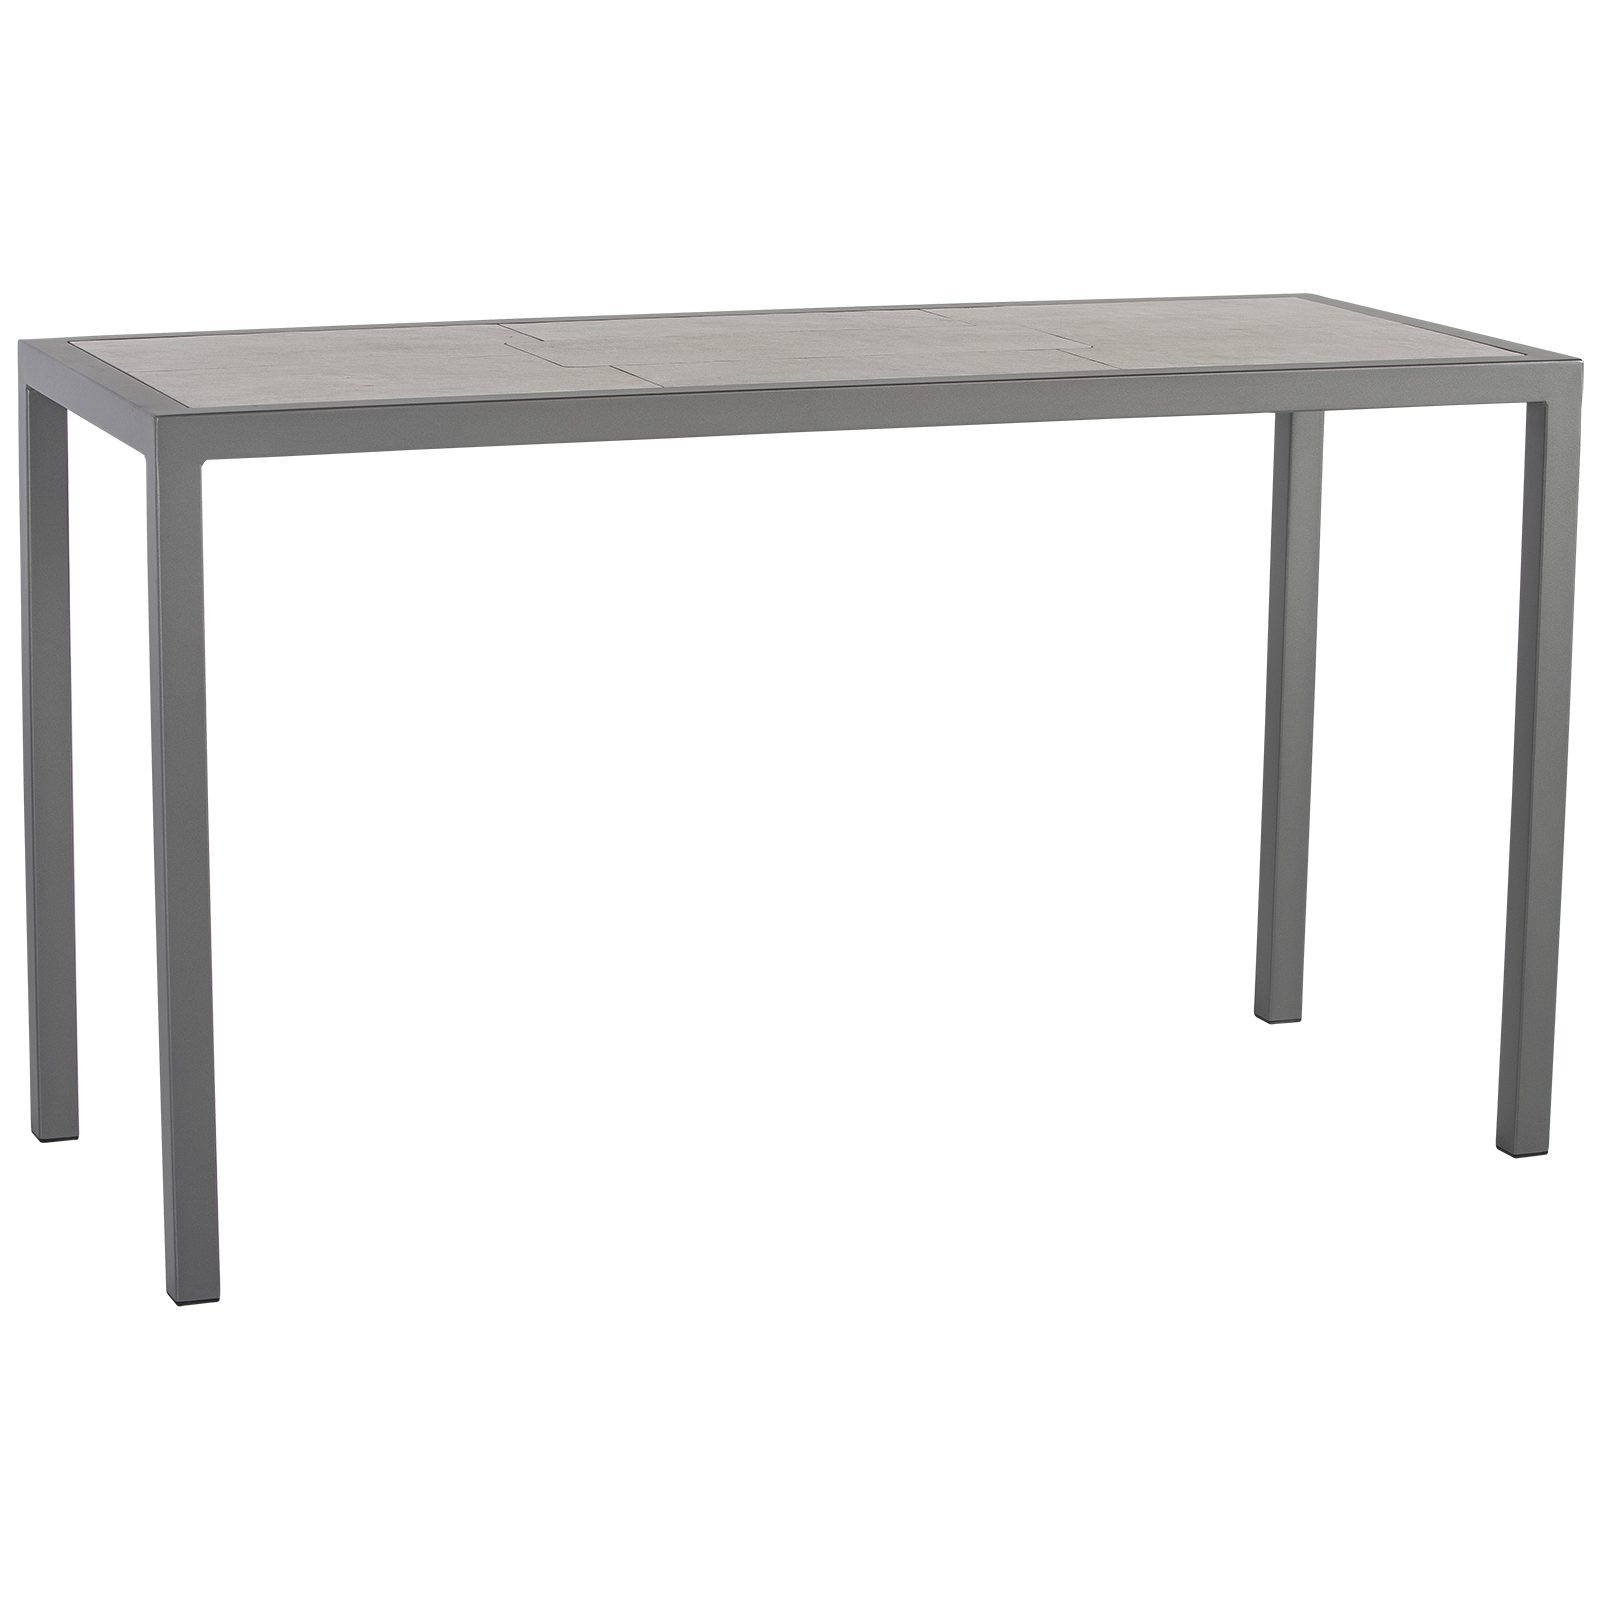 21" x 57" Dining Table - Fully Welded Tables - Quadra Iron Tables 99